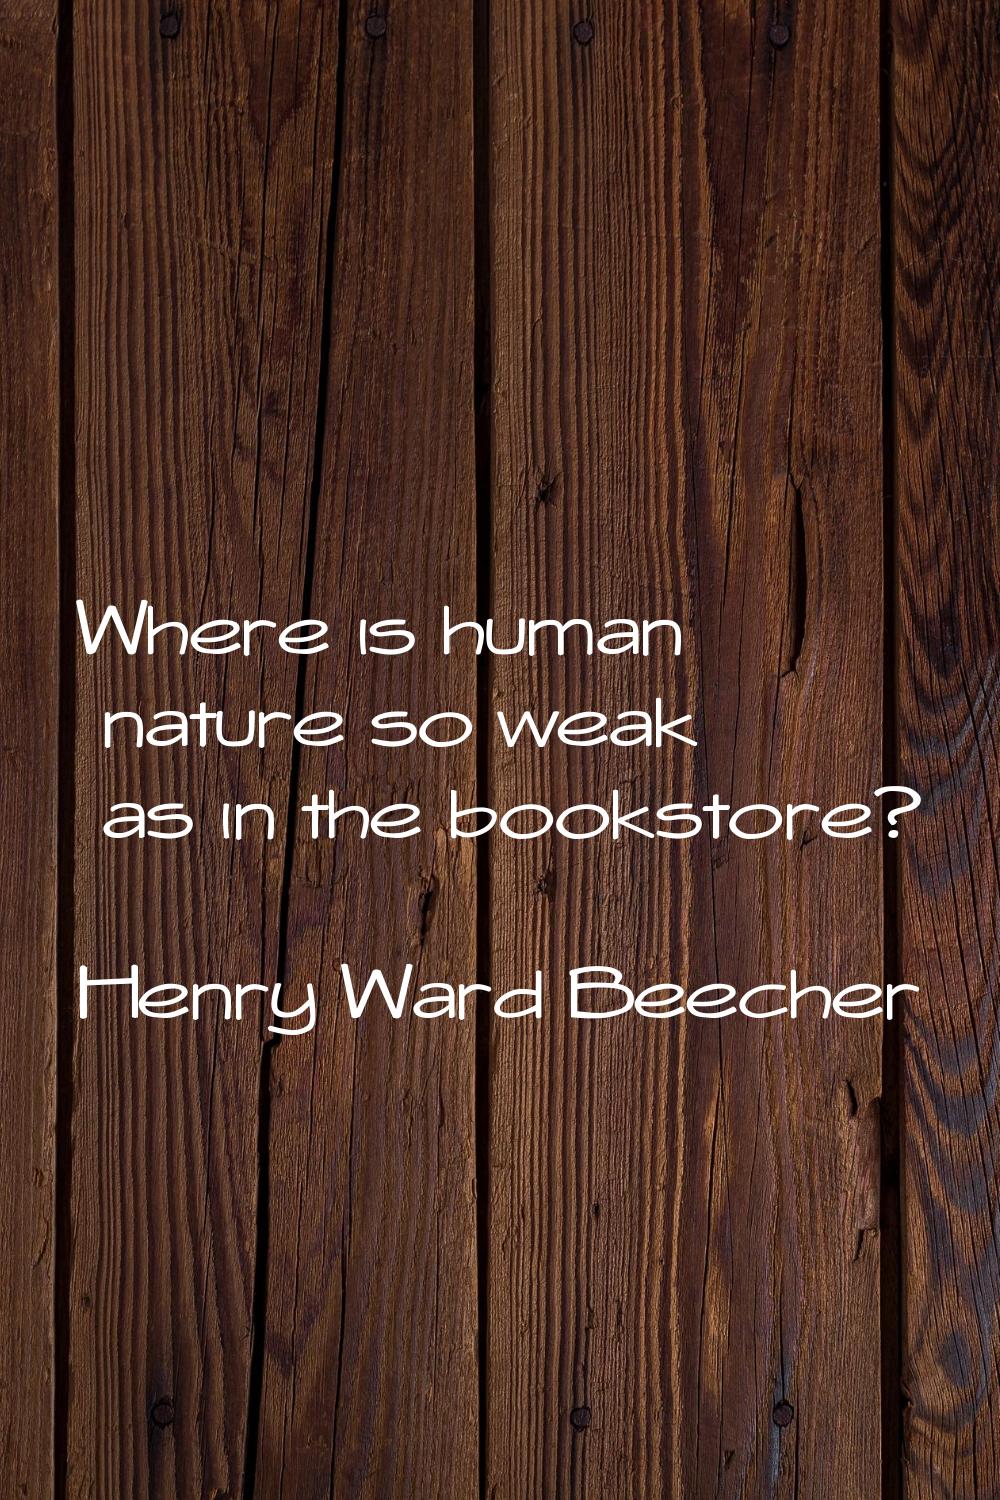 Where is human nature so weak as in the bookstore?